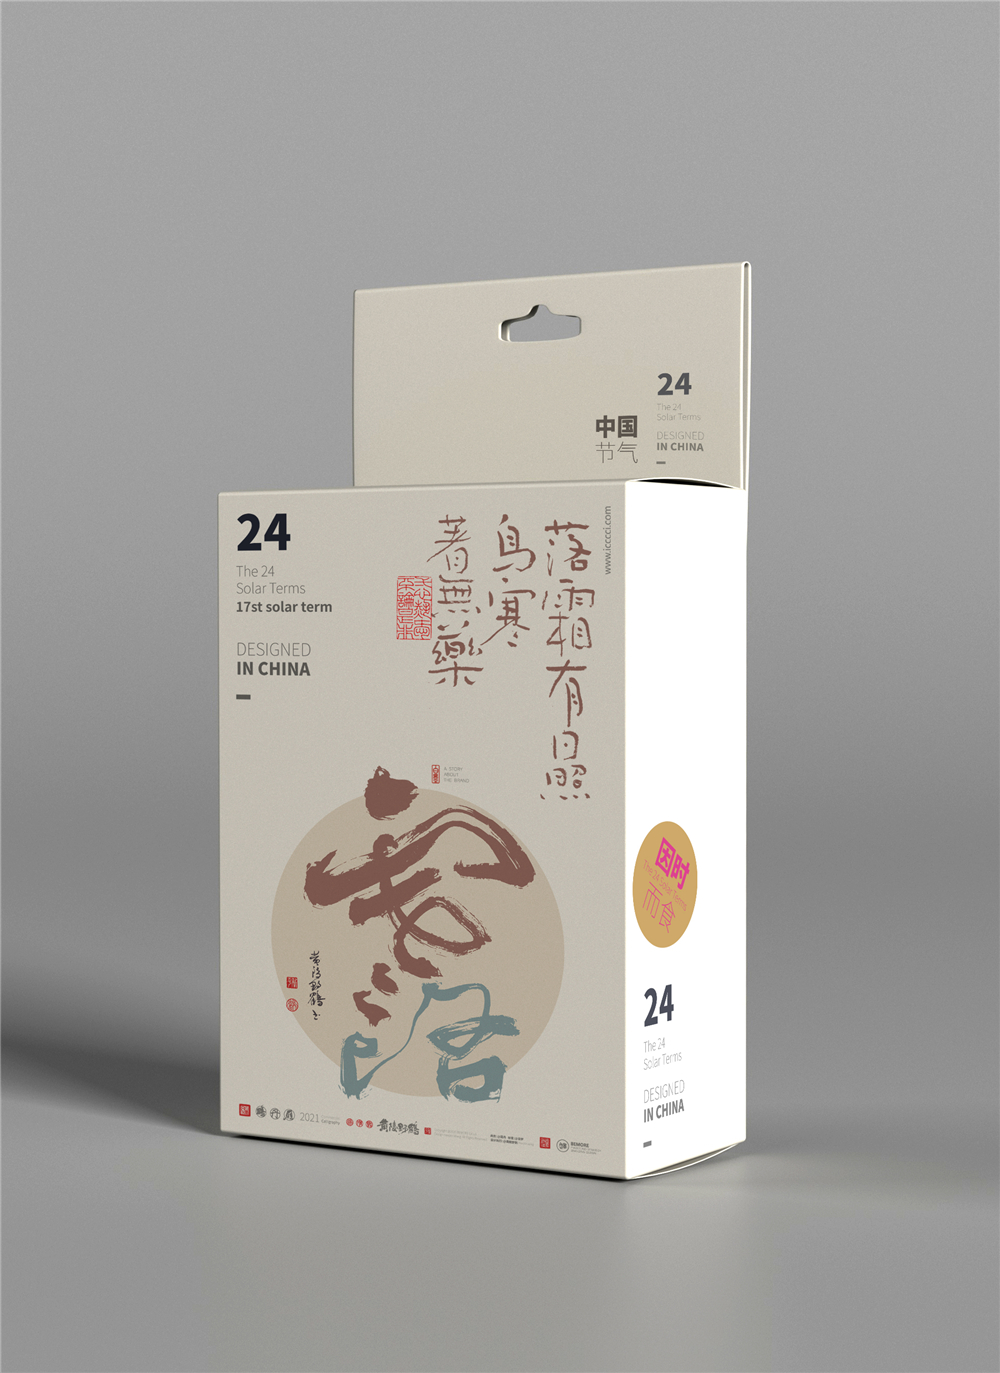 48P Collection of the latest Chinese font design schemes in 2021 #.110